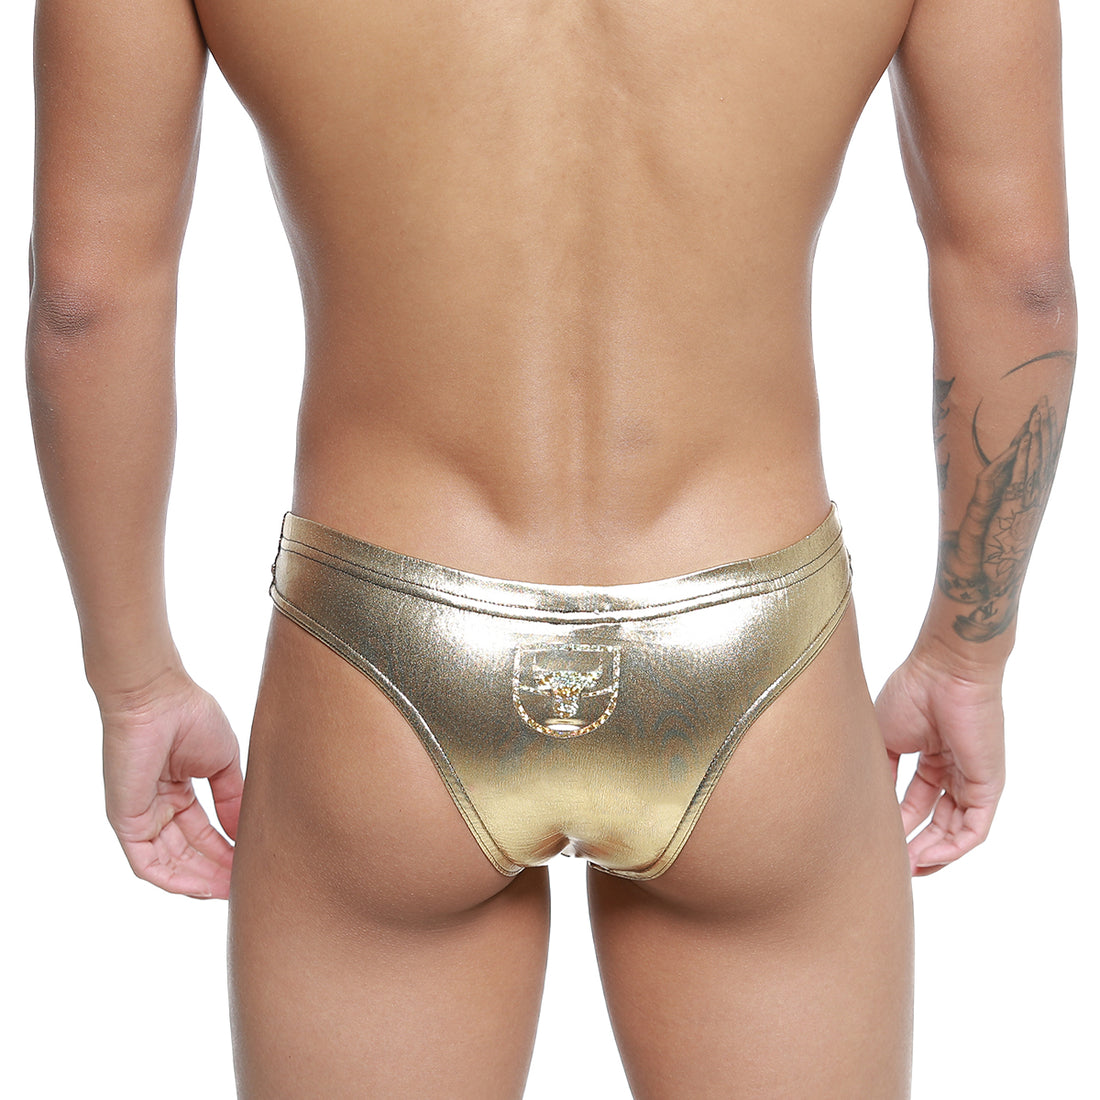 [MetroMuscleWear] Jupiter Competition Suit Gold (4974-90)